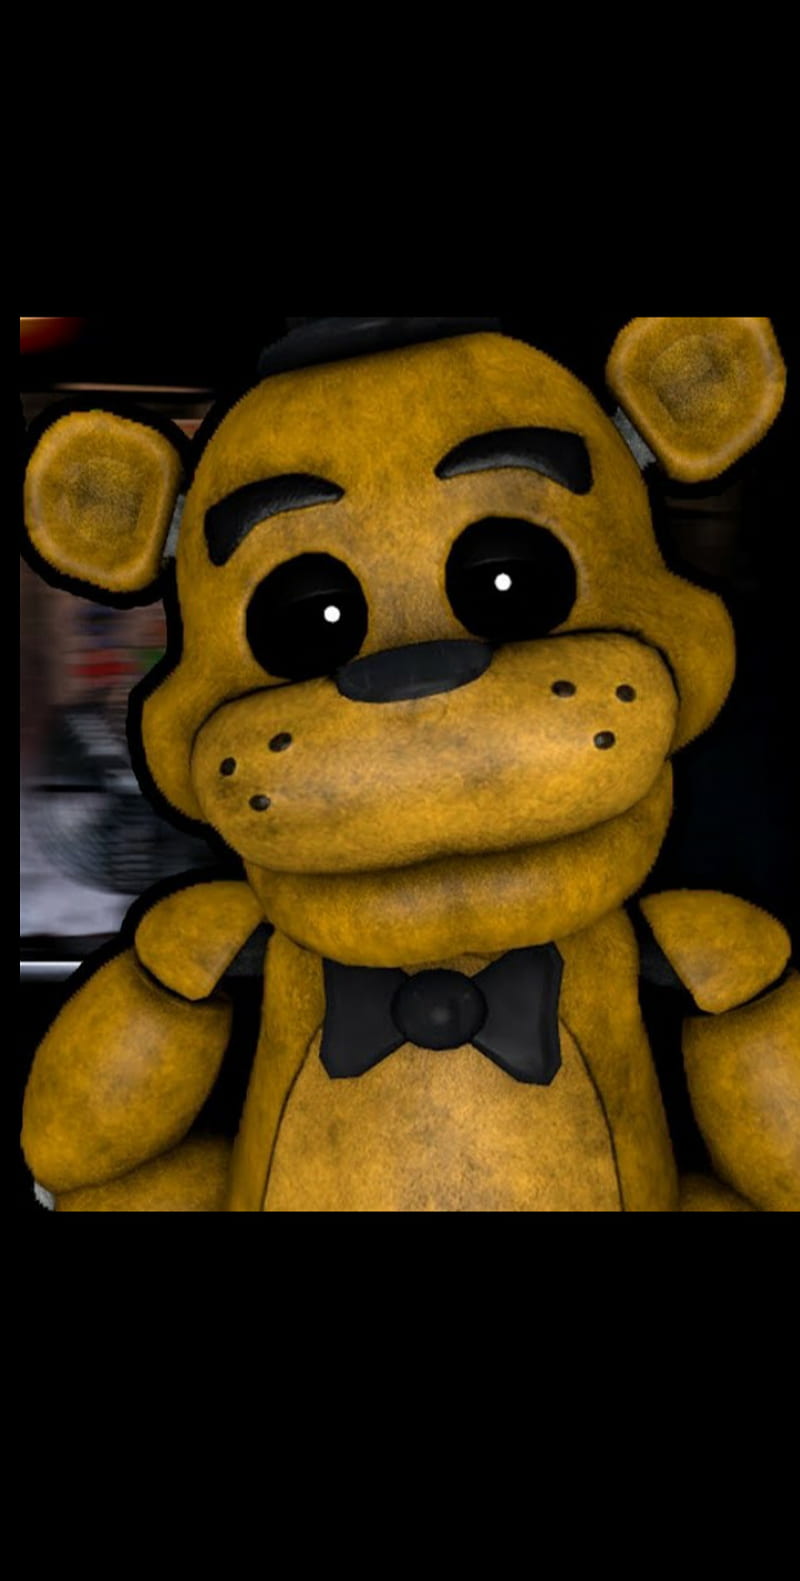 ImageDifferences between the Golden Freddy models 